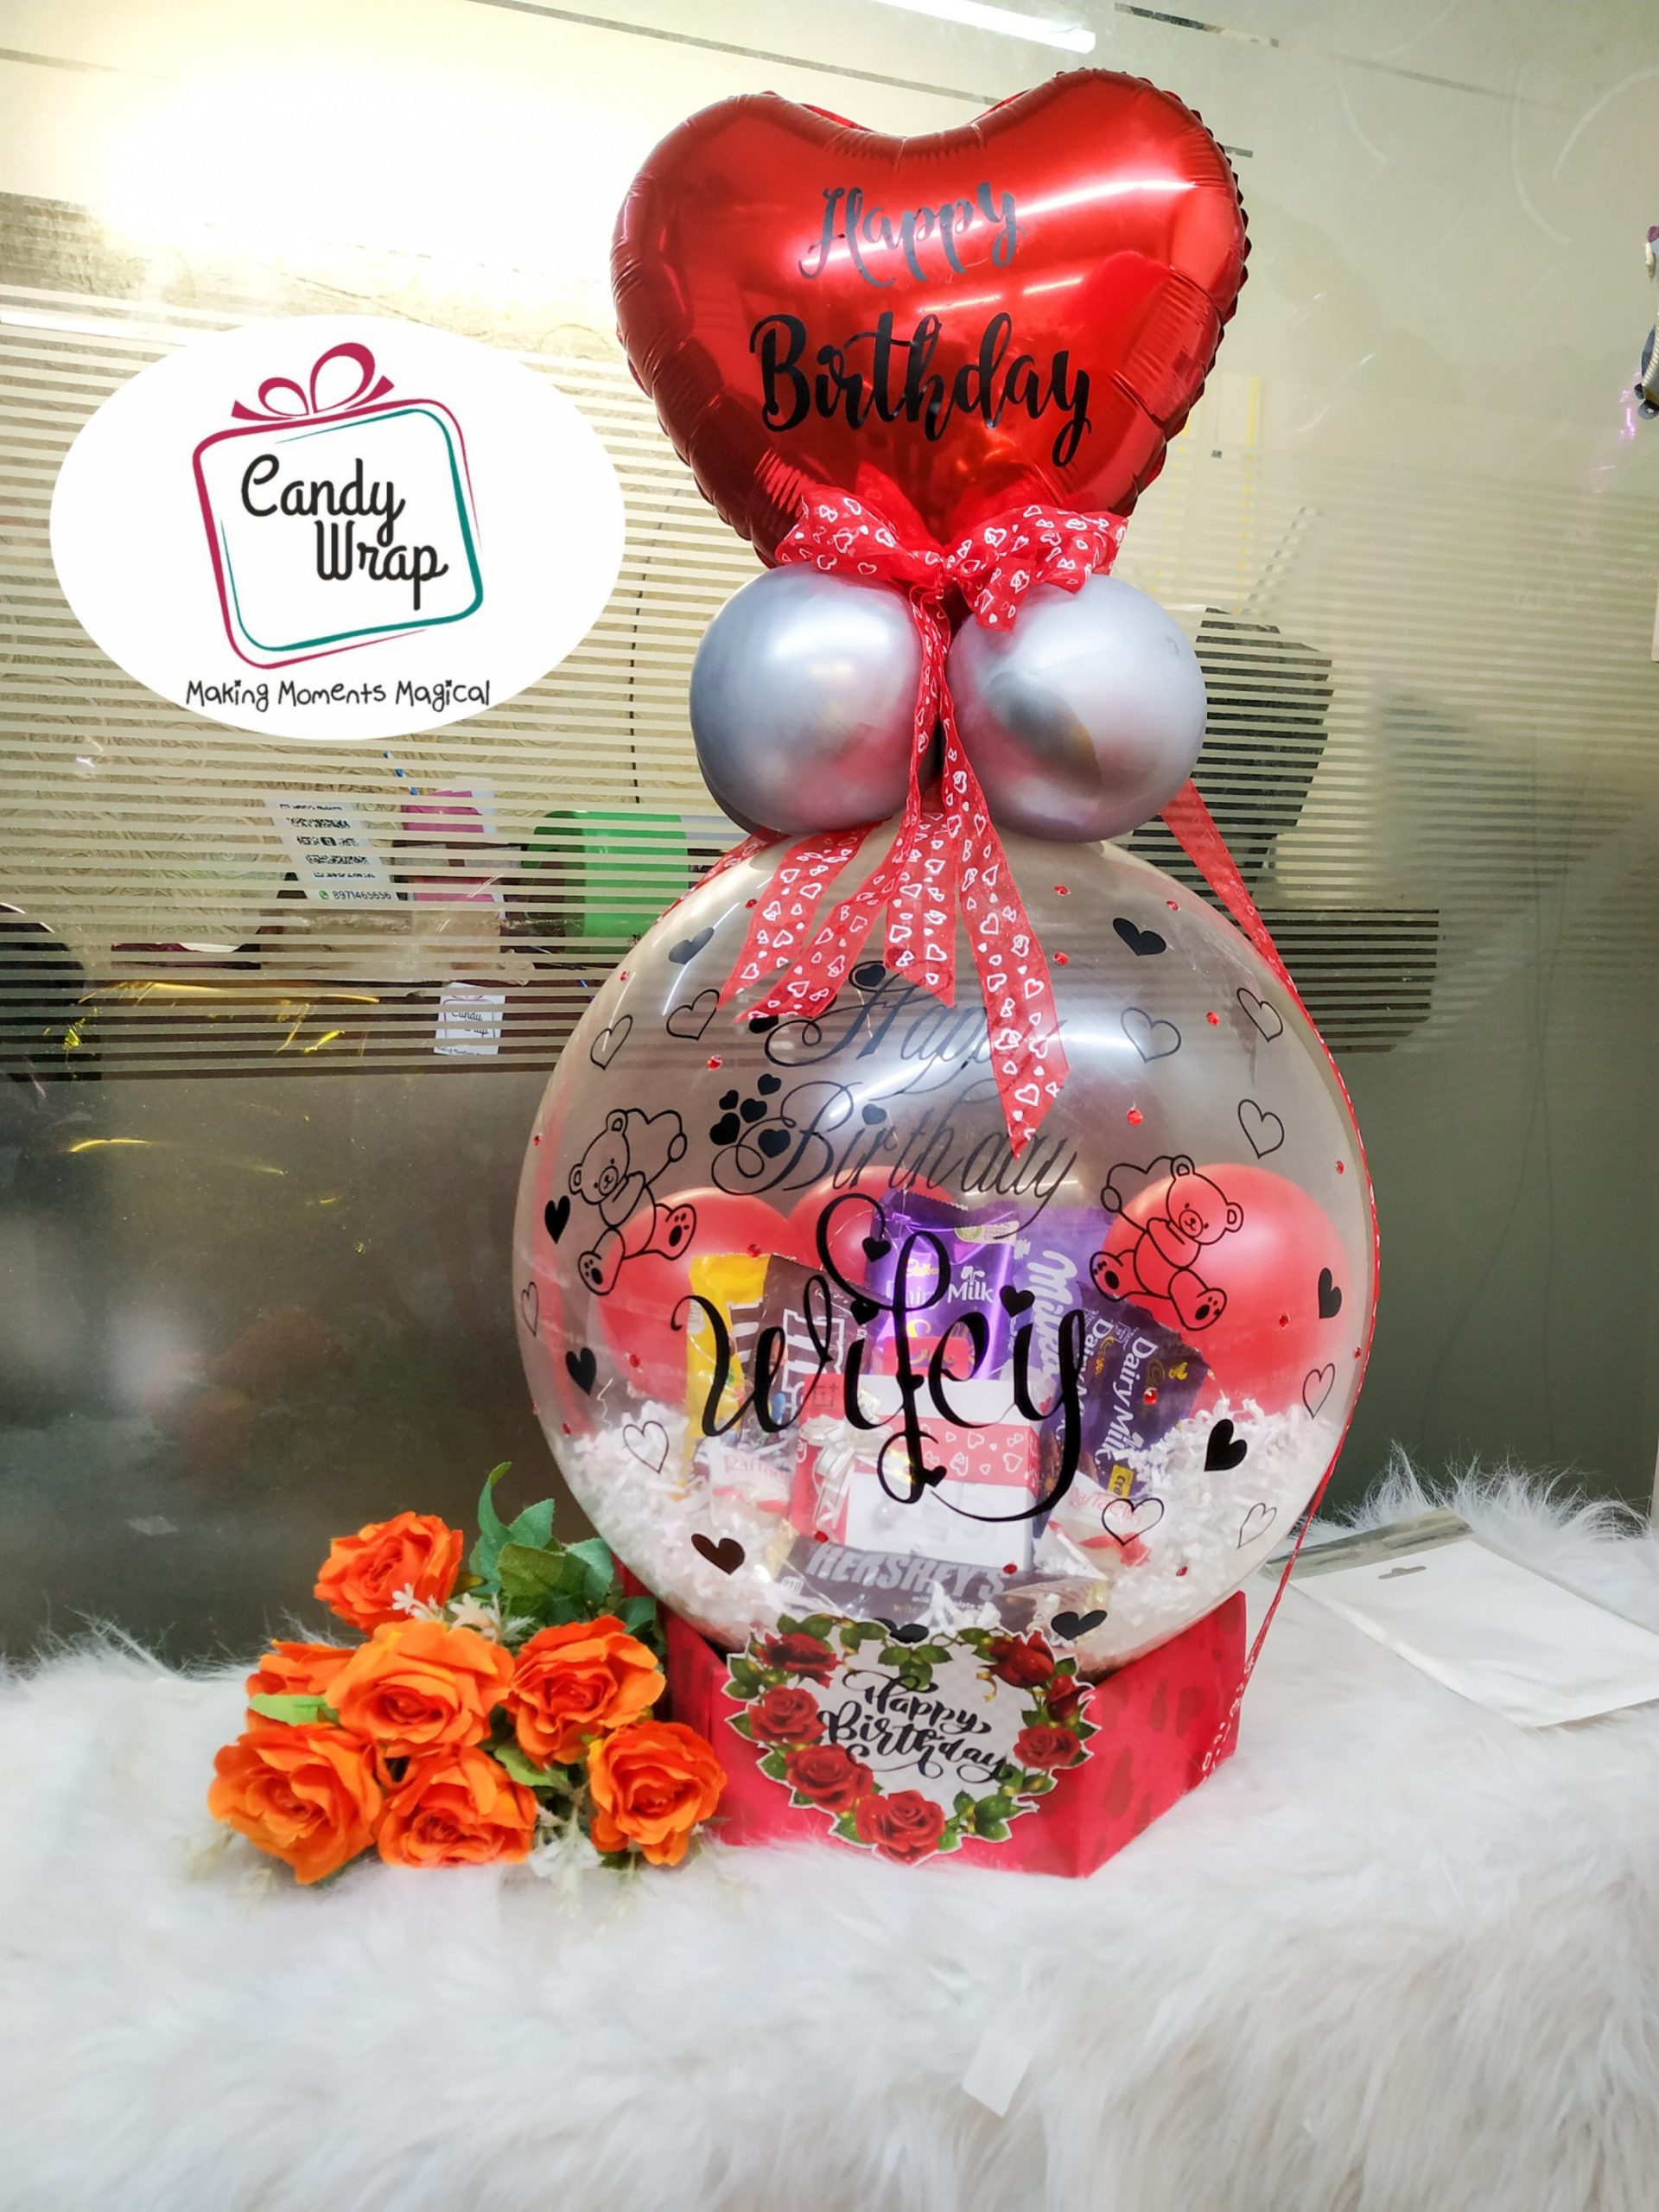 Chocolate bubble balloons Bouquet best Gift for Birthday/Anniversary -  Indiaflorist247